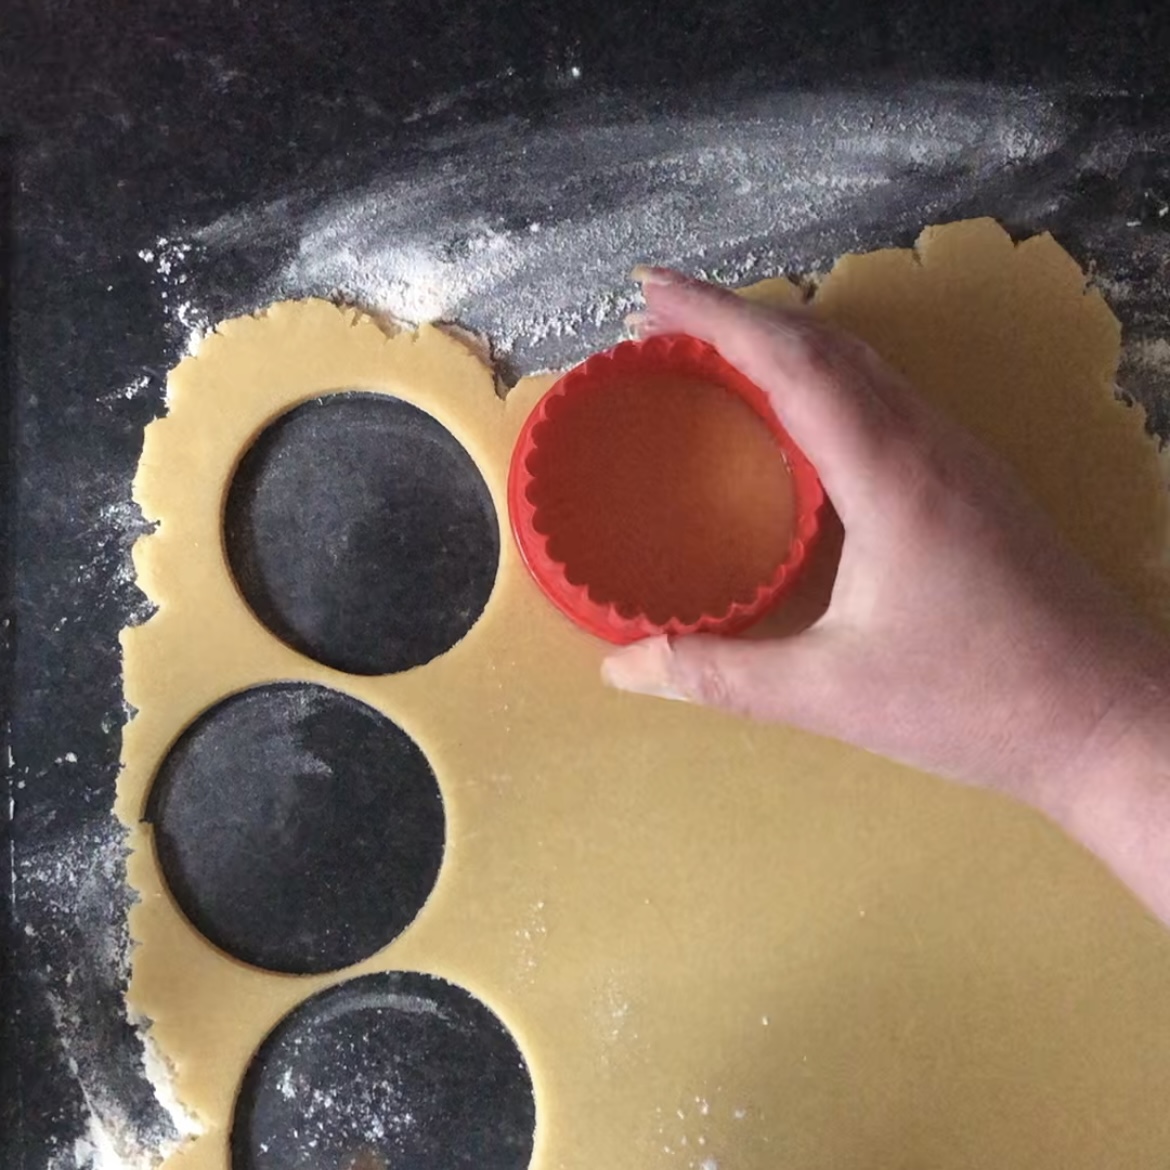 Cut out your biscuits with a circle cutter